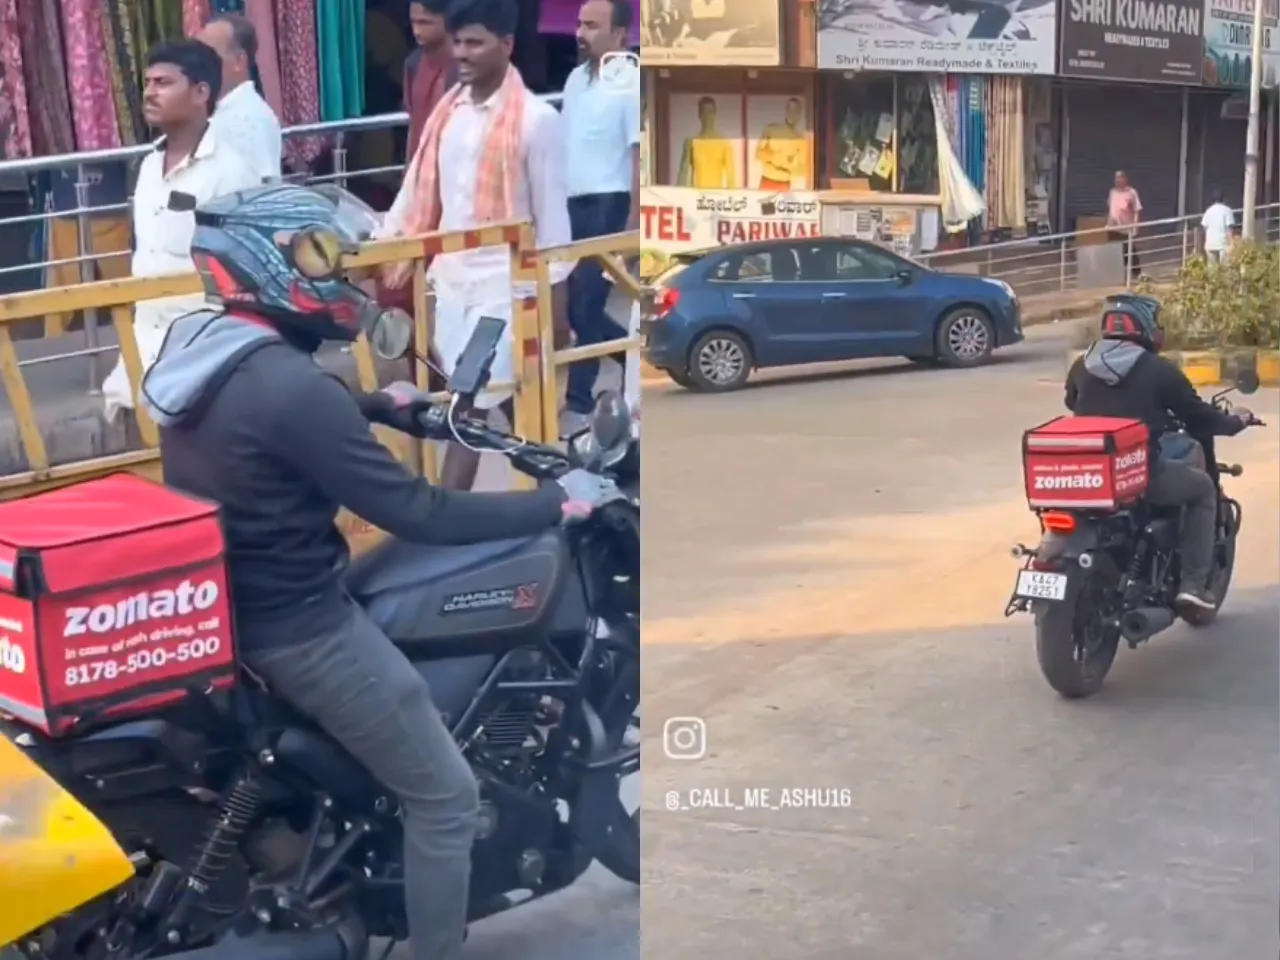 Zomato delivery boy delivers food on a Harley-Davidson bike